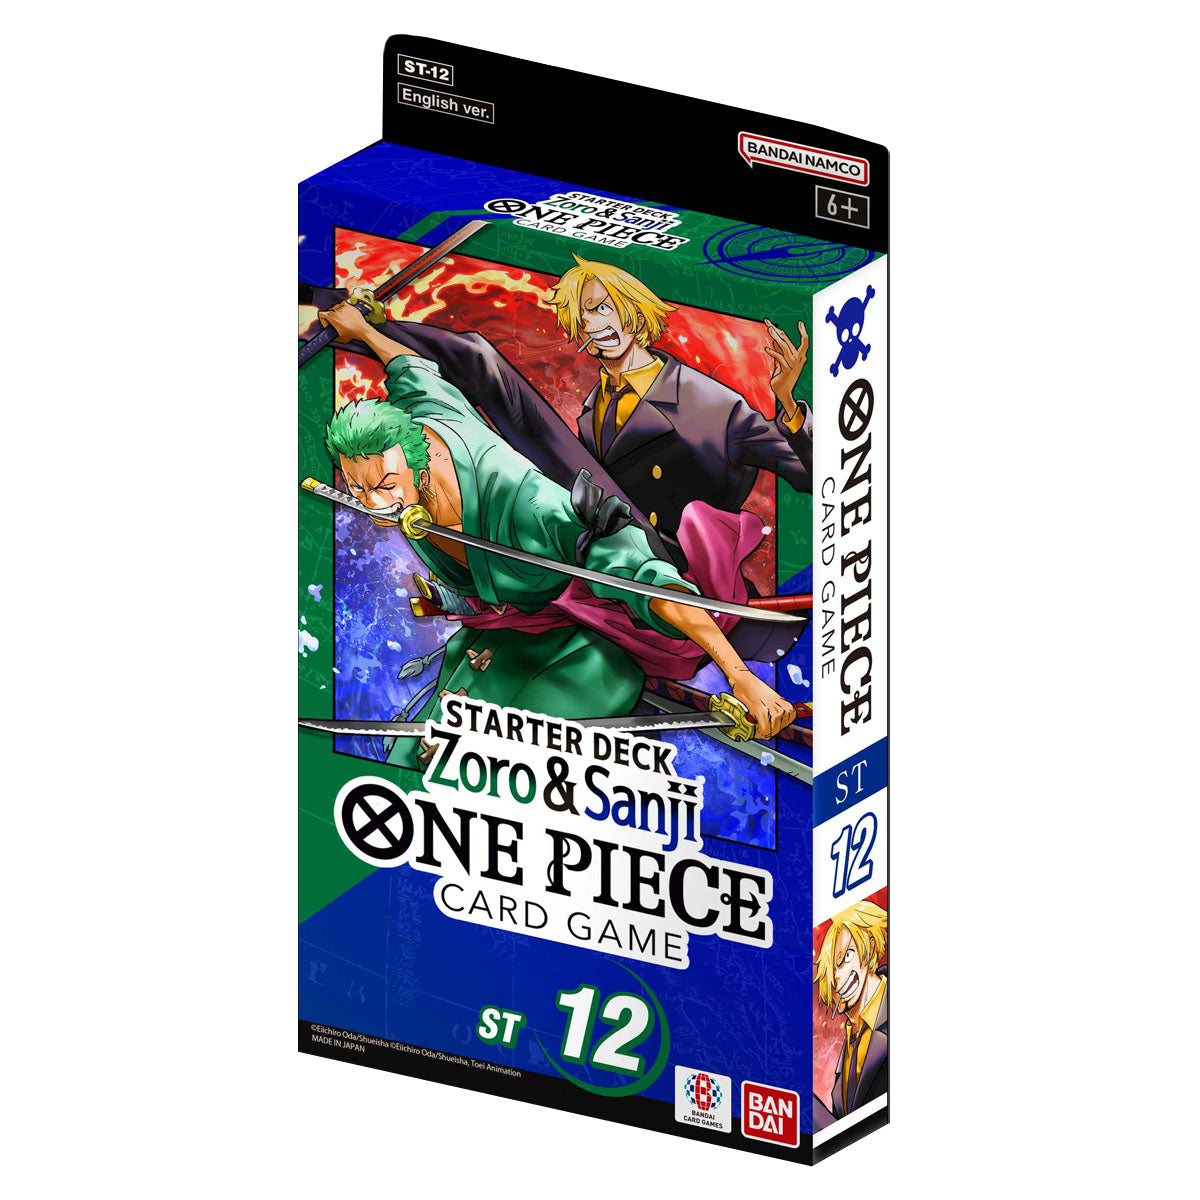 One Piece Card Game Zoro and Sanji Starter Deck (ST-12)